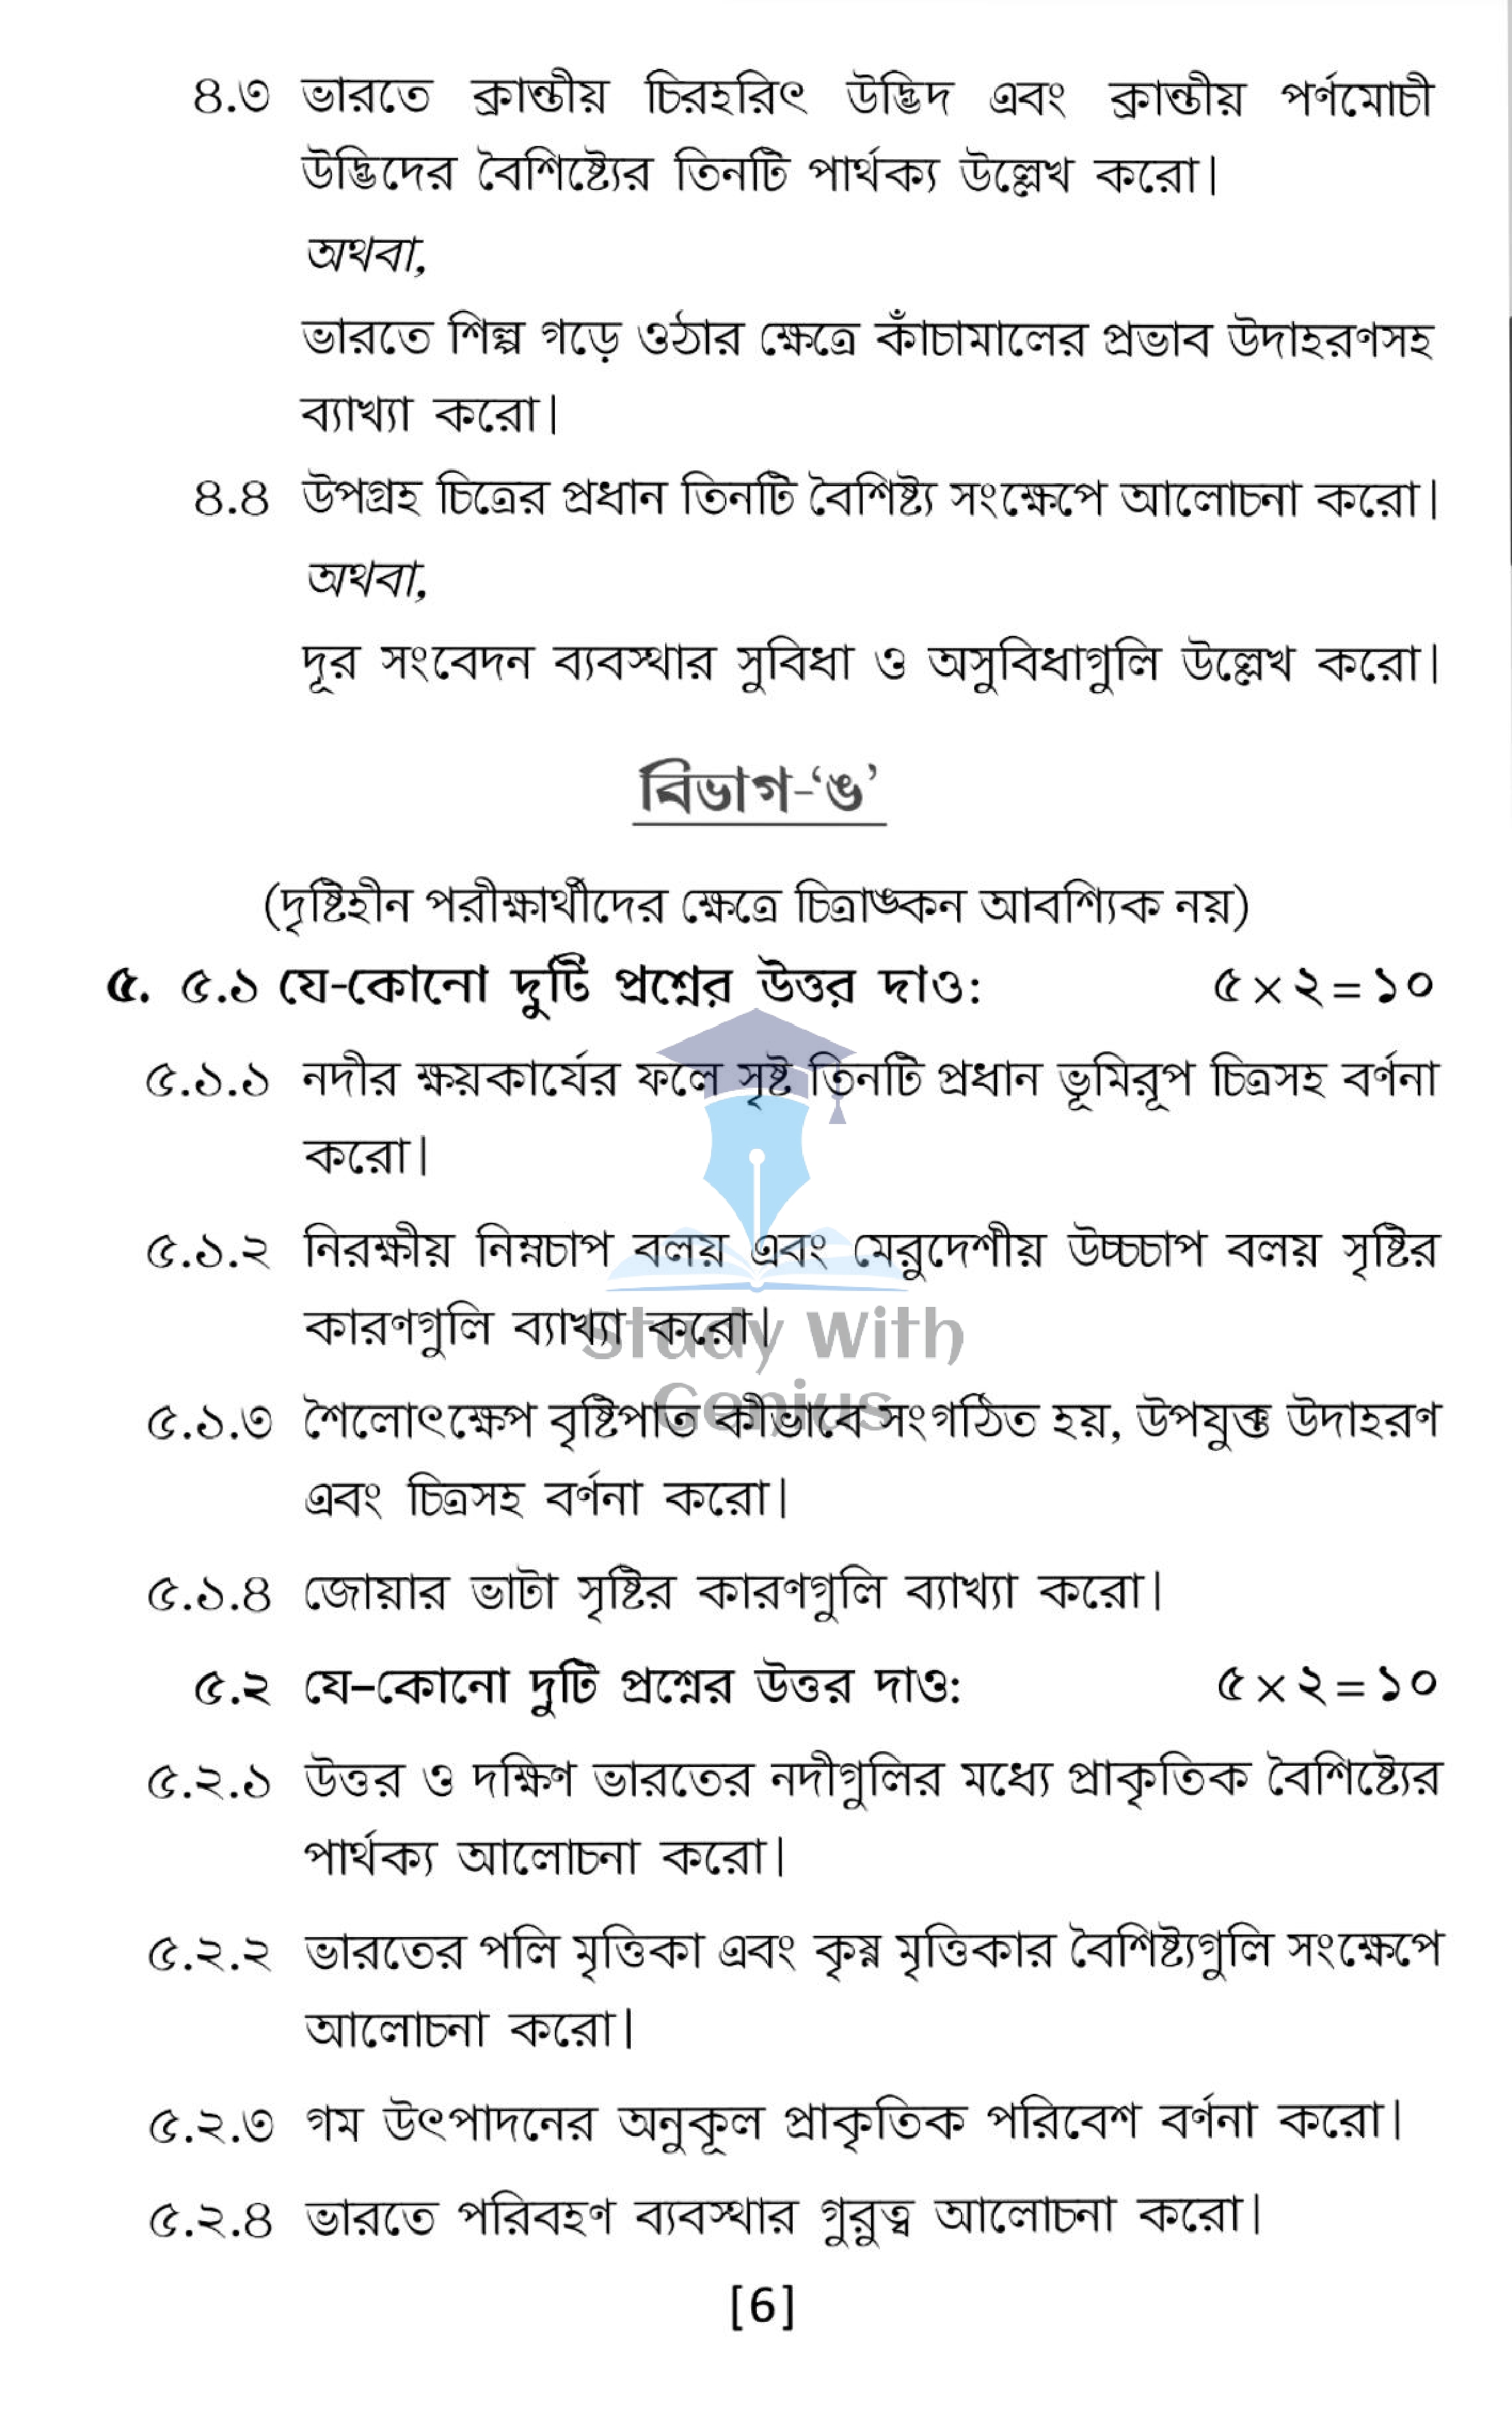 WBBSE Madhyamika Geography Subject Question Papers Bengali Medium 2019